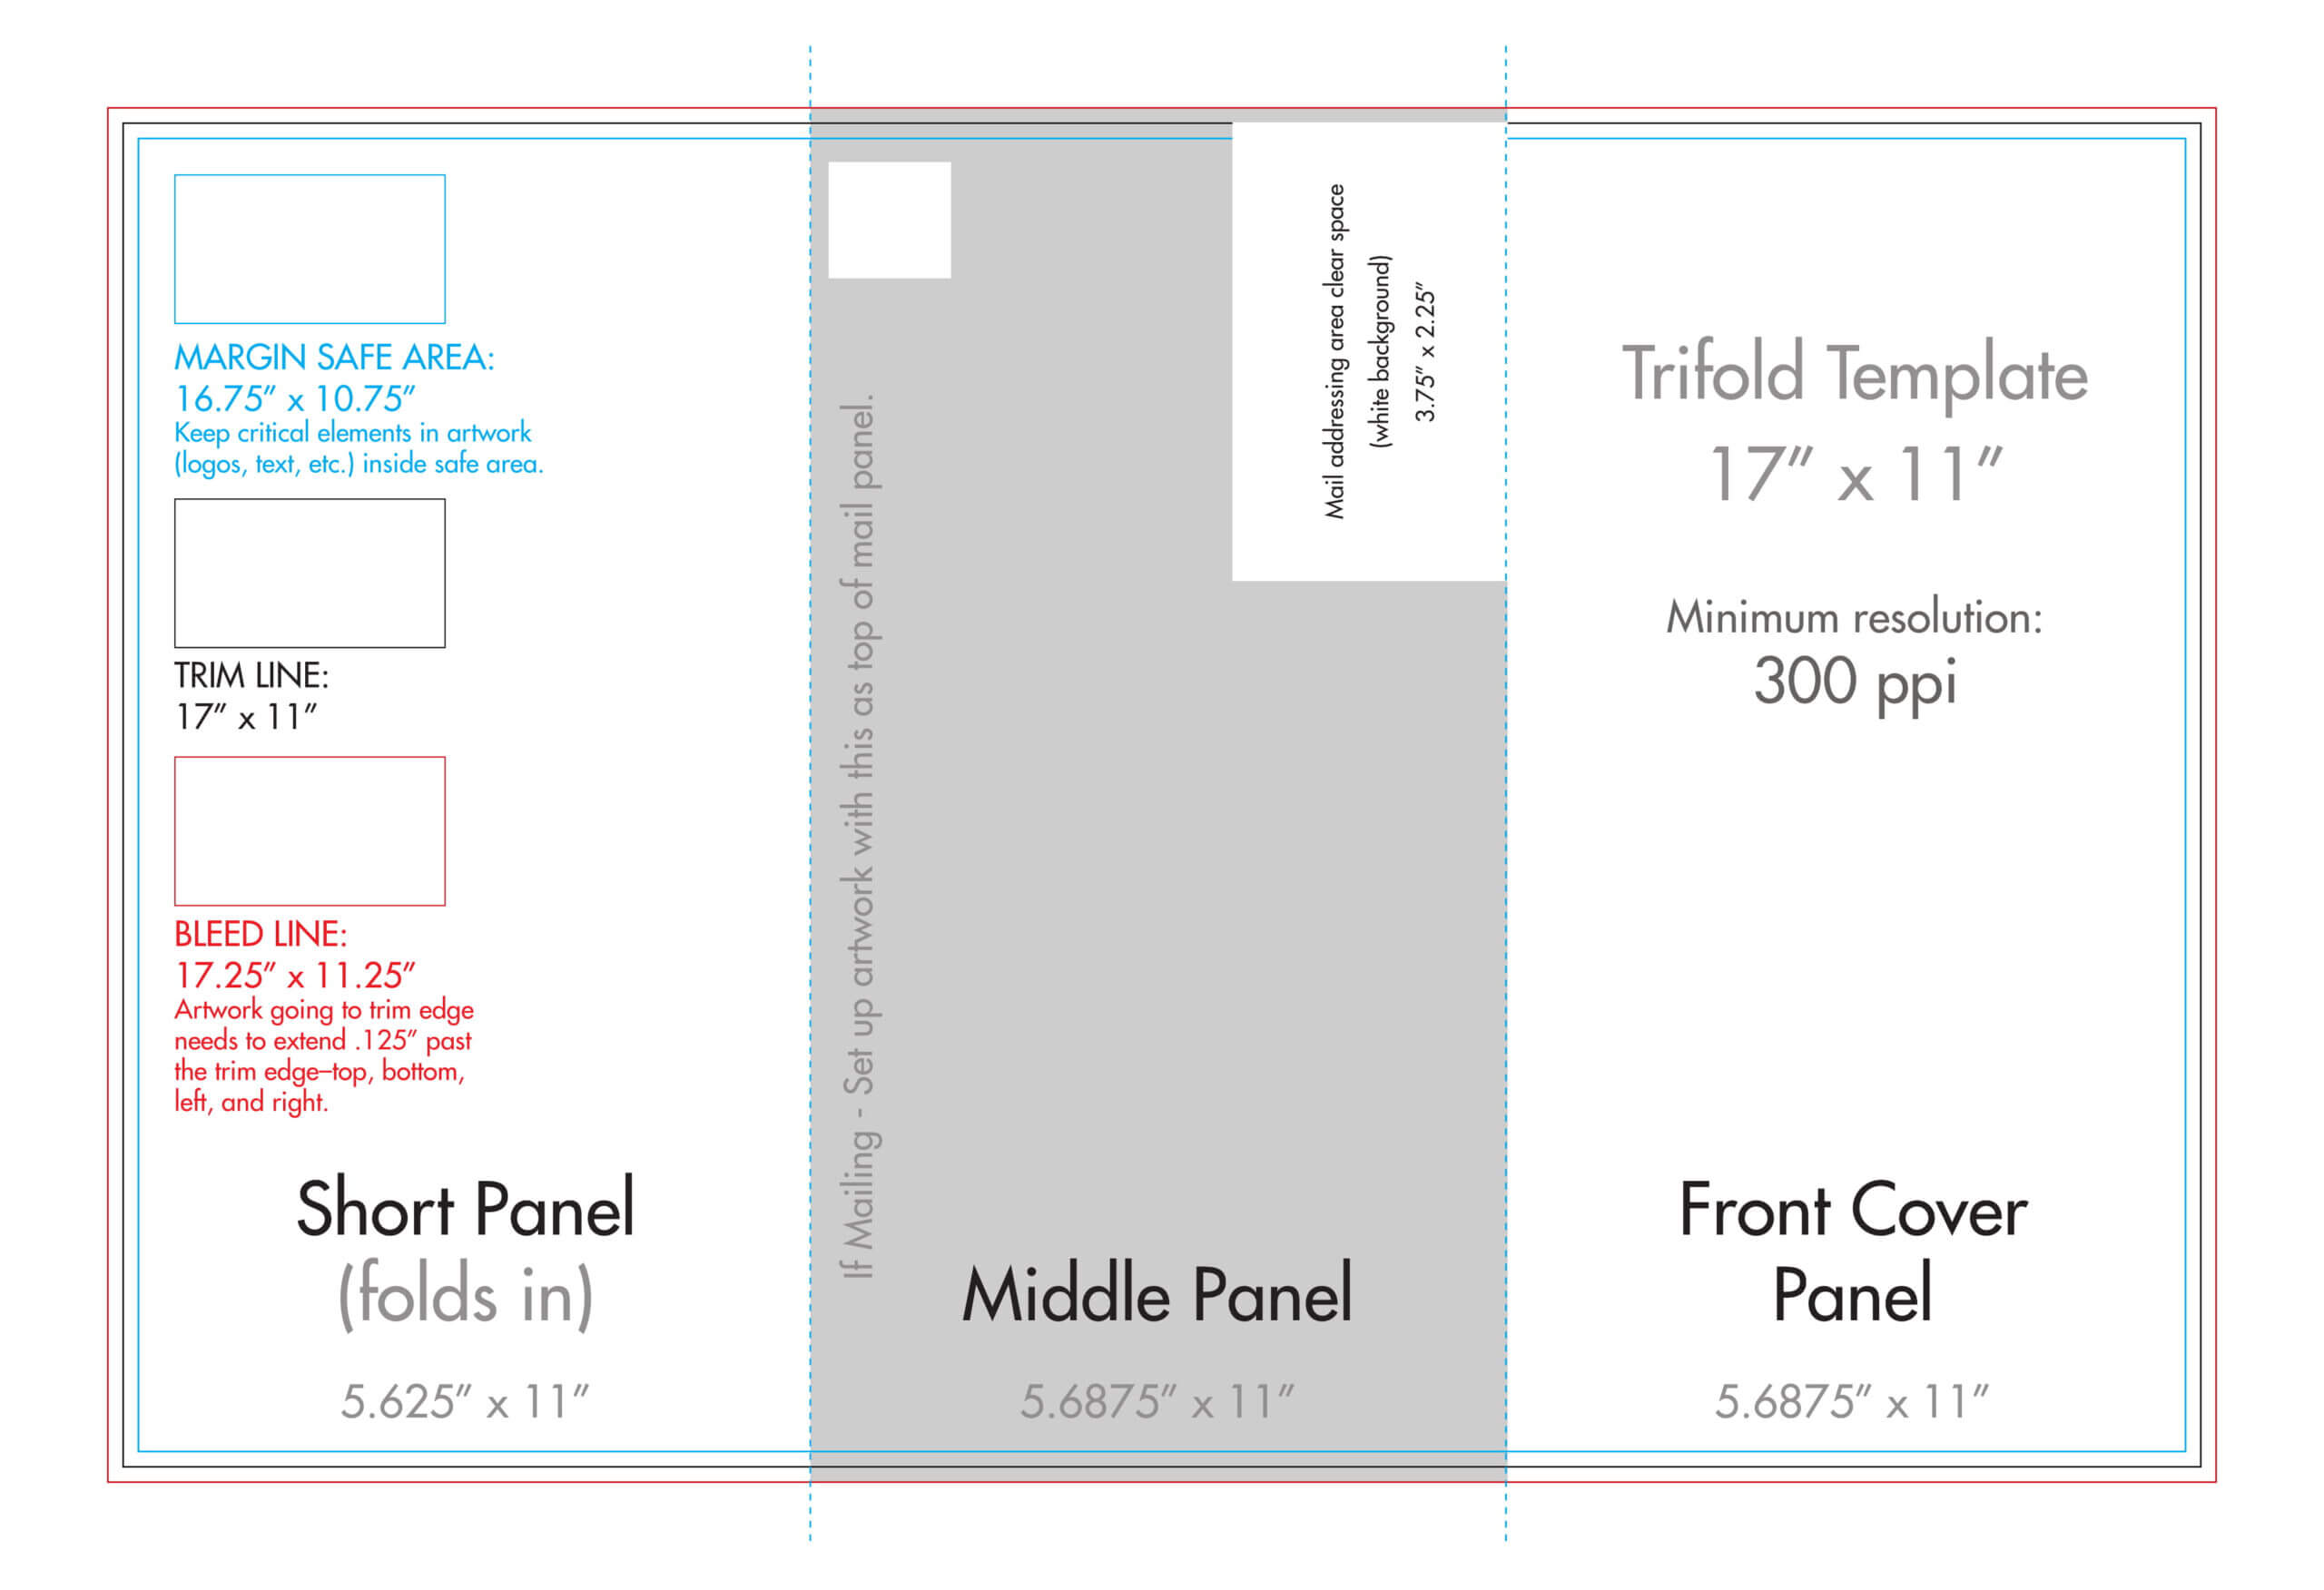 035 Trifold 11X17 Template Tri Fold Flyer Indesign Throughout 11X17 Brochure Template